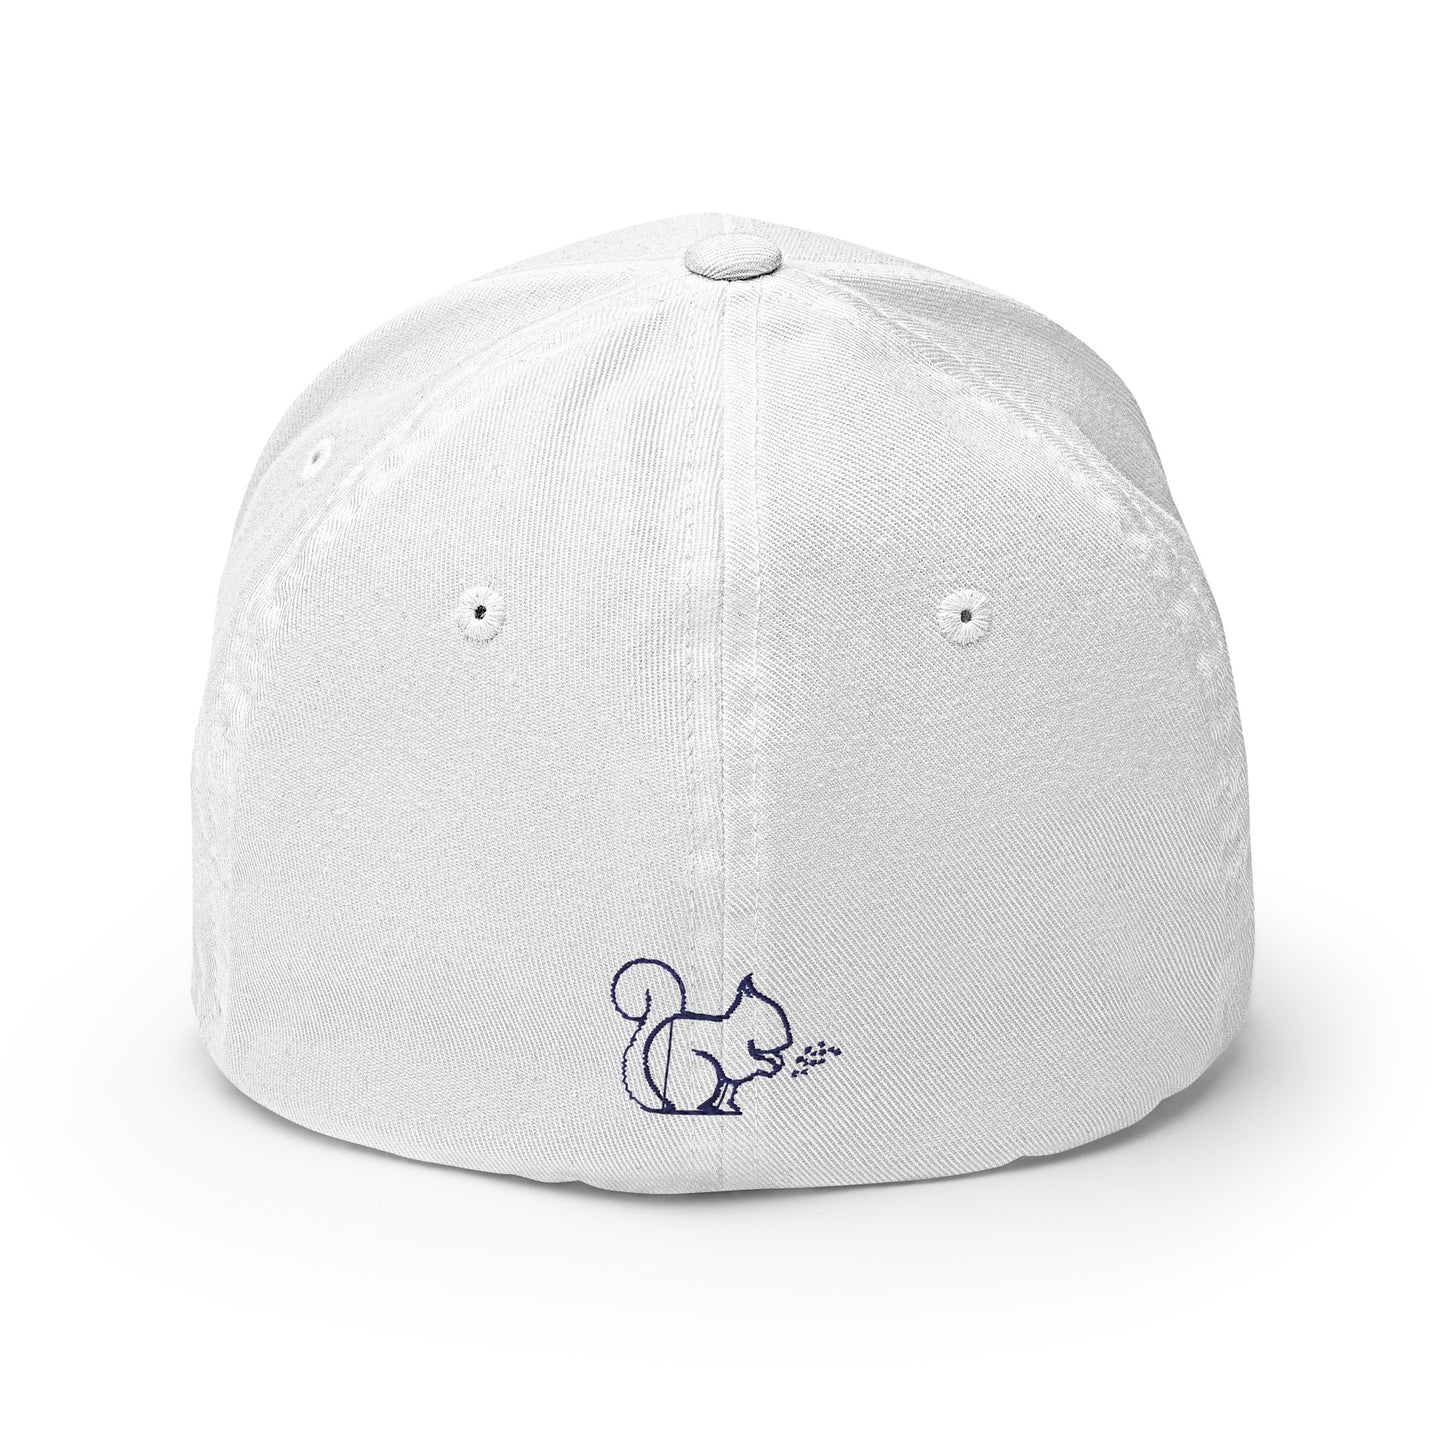 Caddy Couture Structured Twill Cap - White